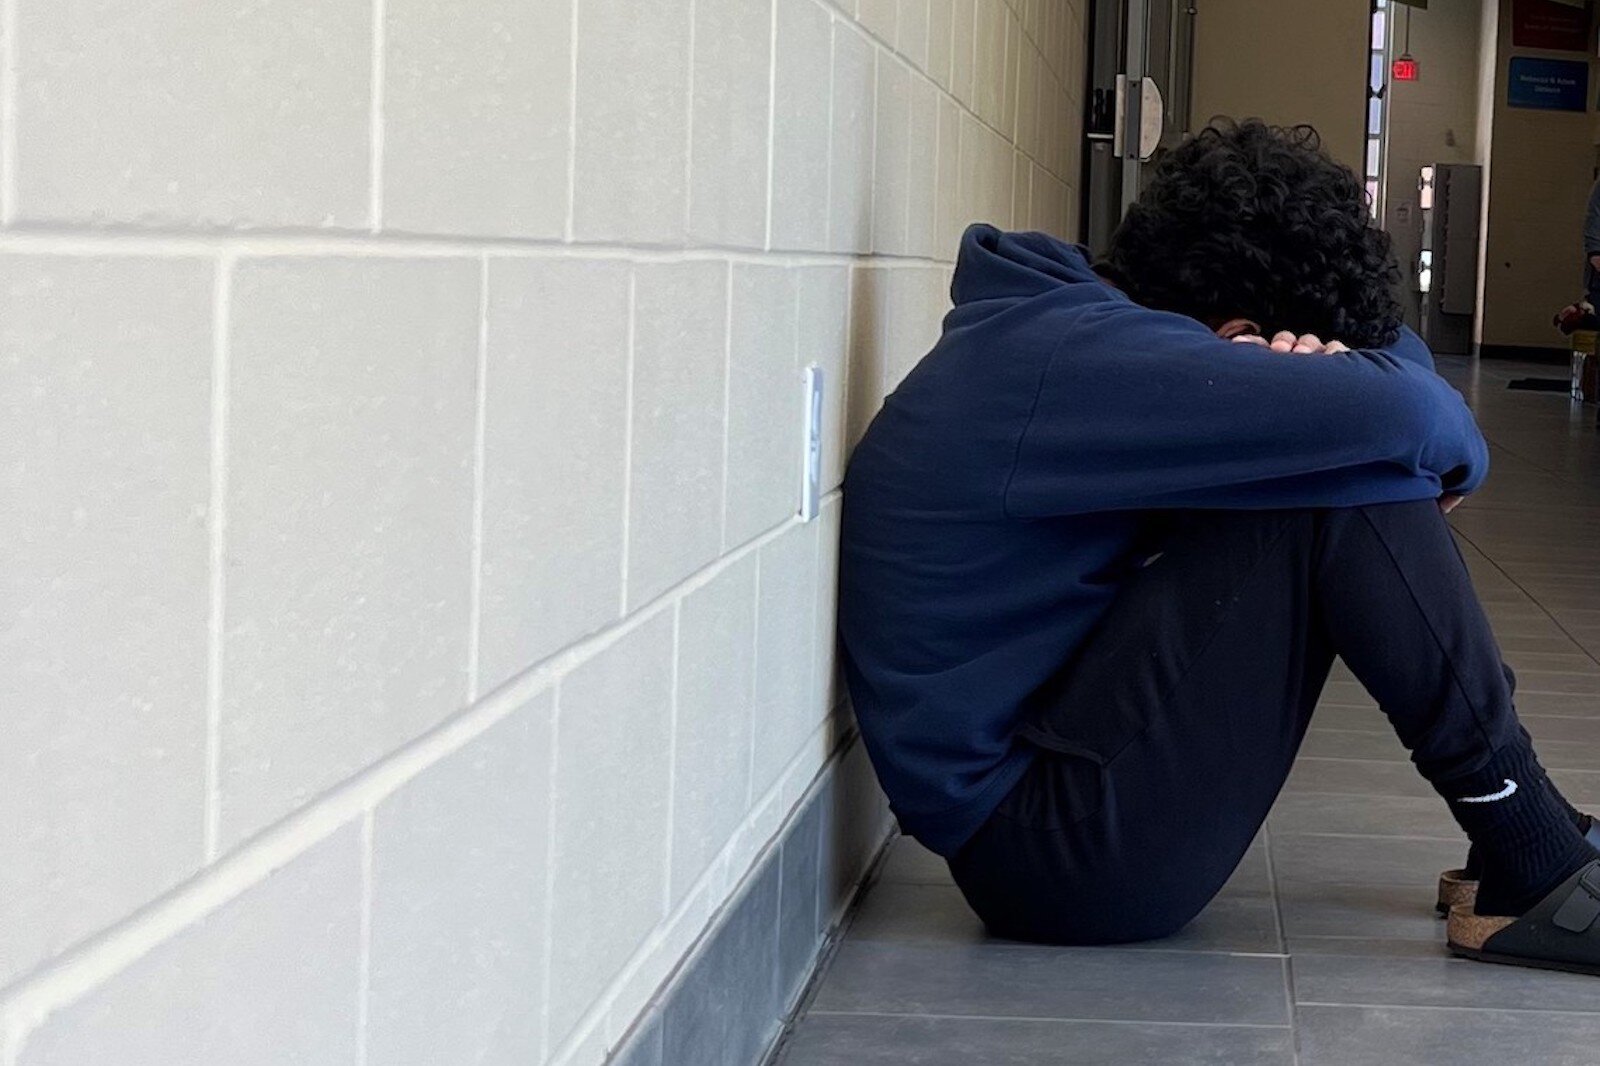 A high schooler sits by himself in a hallway.  He has fallen behind in class and doesn’t feel he has enough support from teachers throughout the pandemic in this photo staged for staged for illustrative purposes.